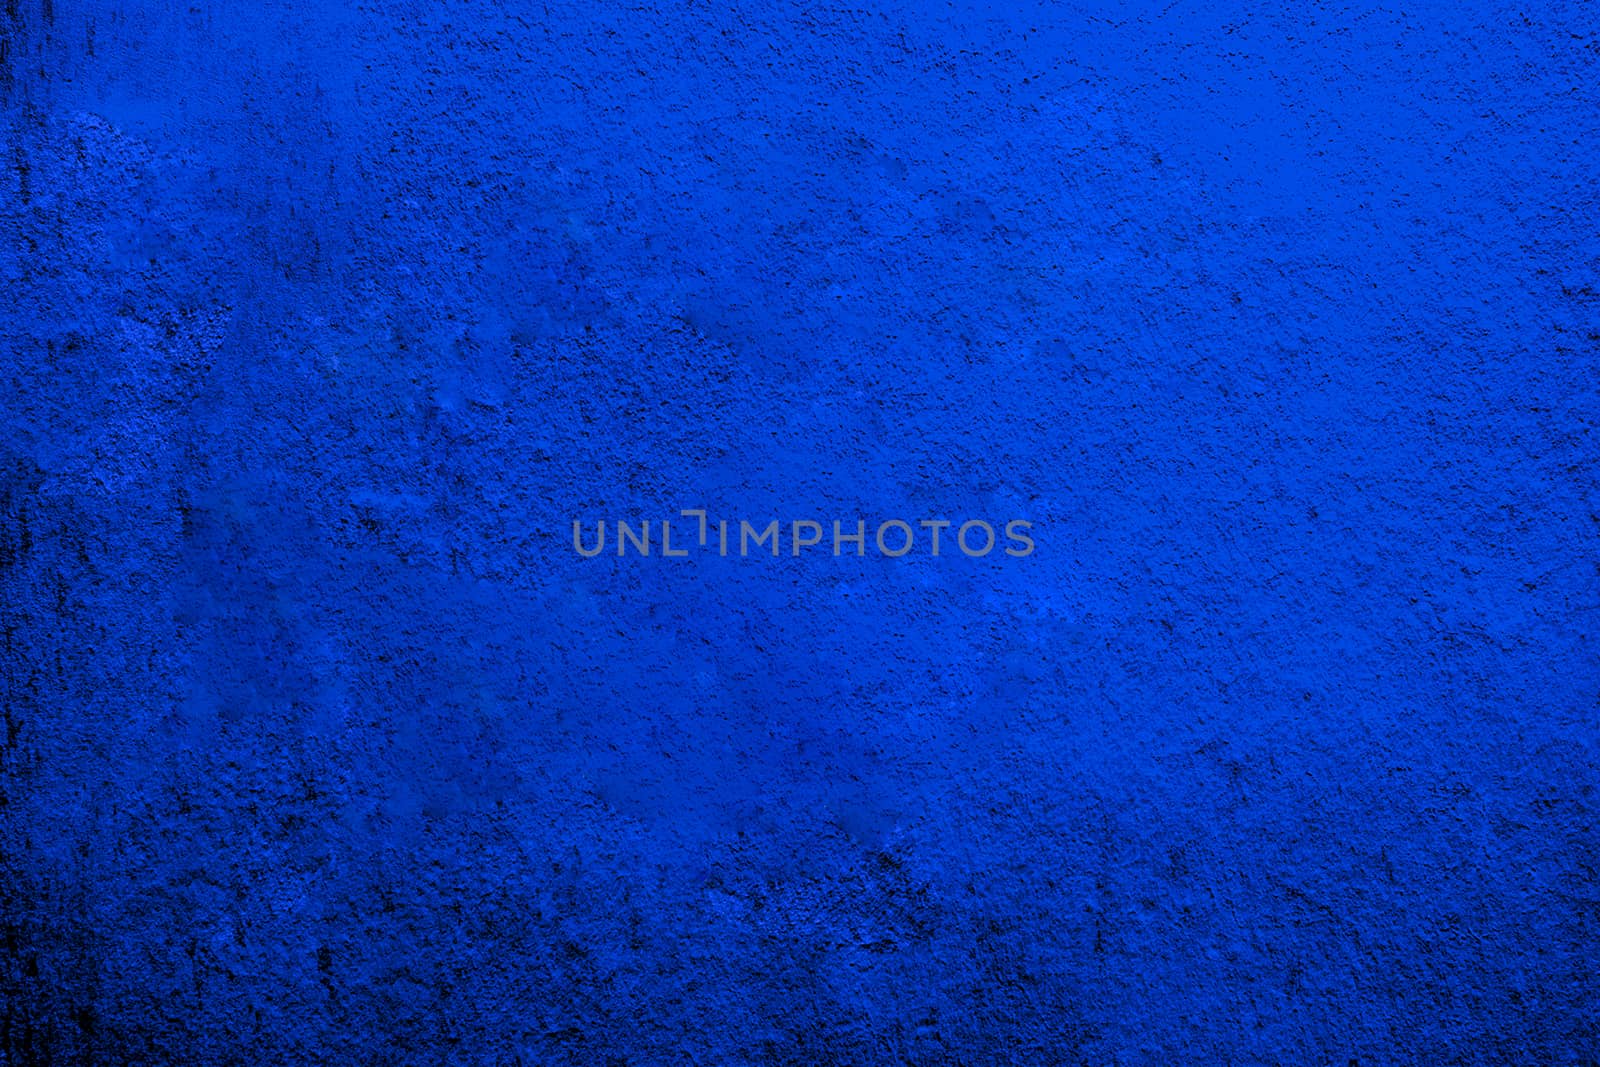 Abstract grunge decorative navy blue cement stucco wall background. Stylized textured banner wallpaper.